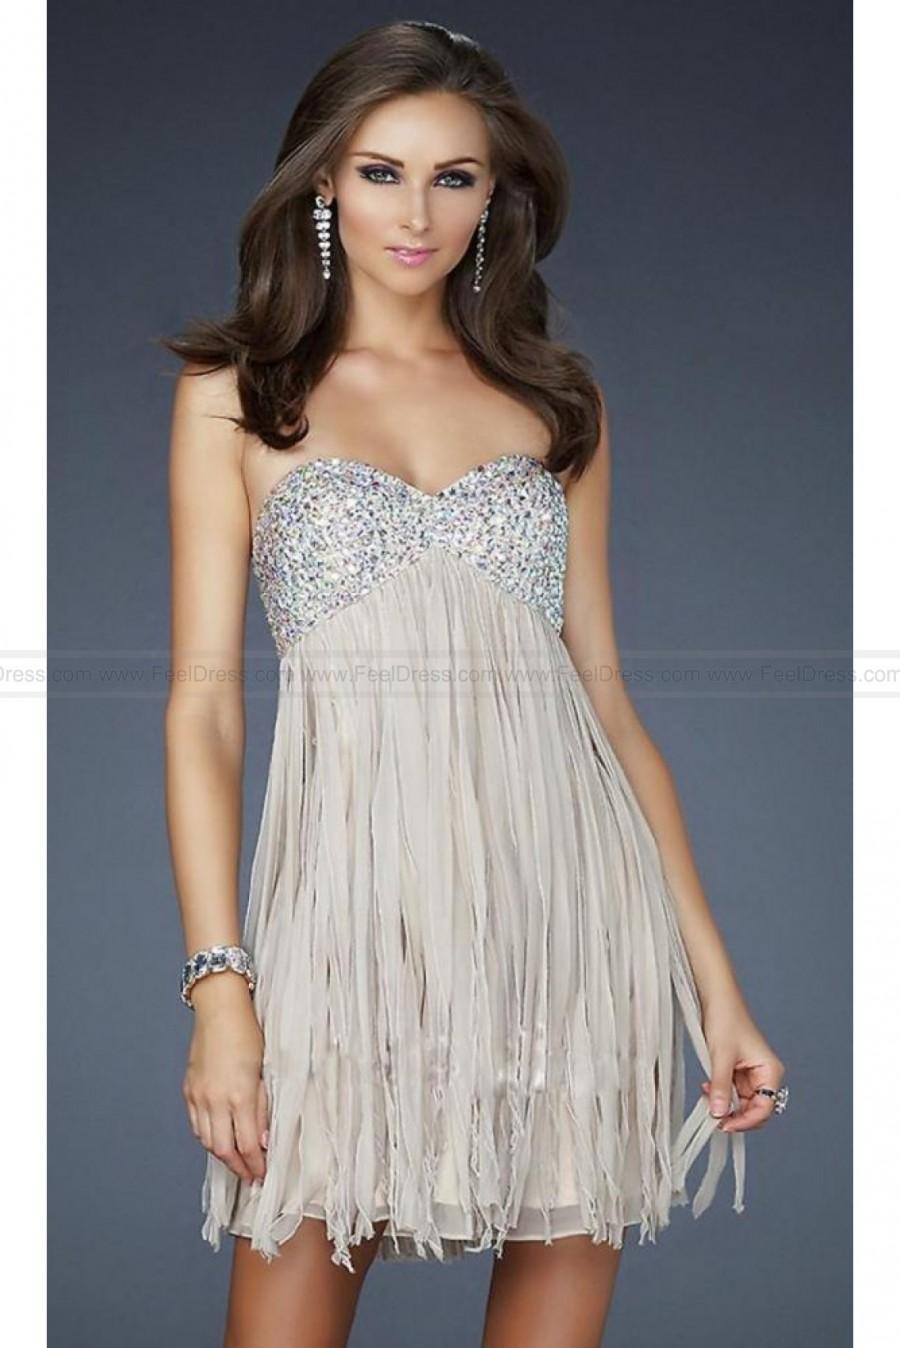 Mariage - A-line Strapless Chiffon Cocktail Dress with beads fringe